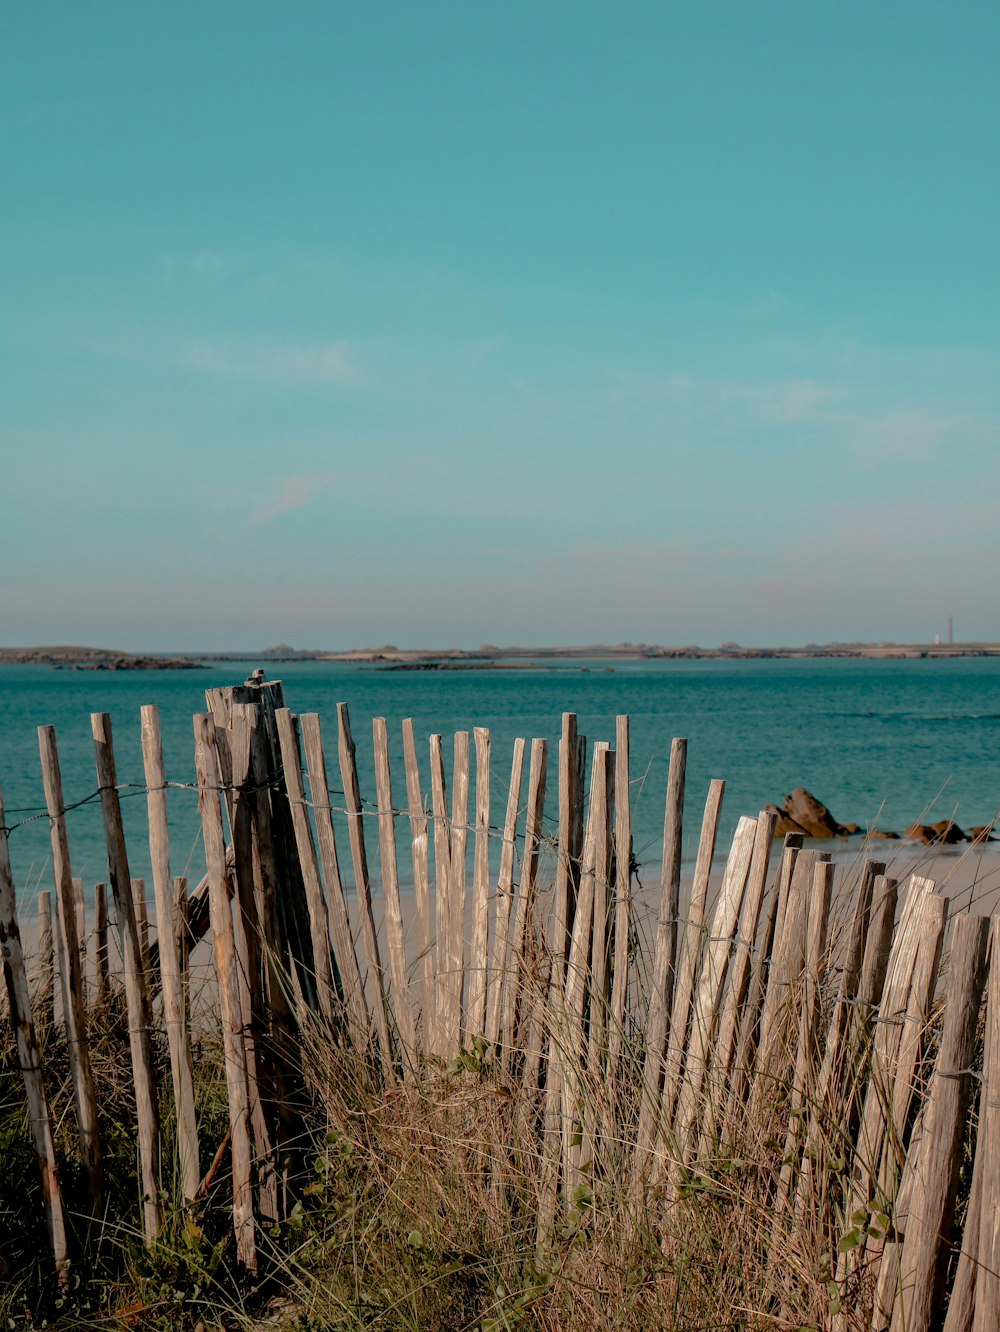 a wooden fence next to a body of water